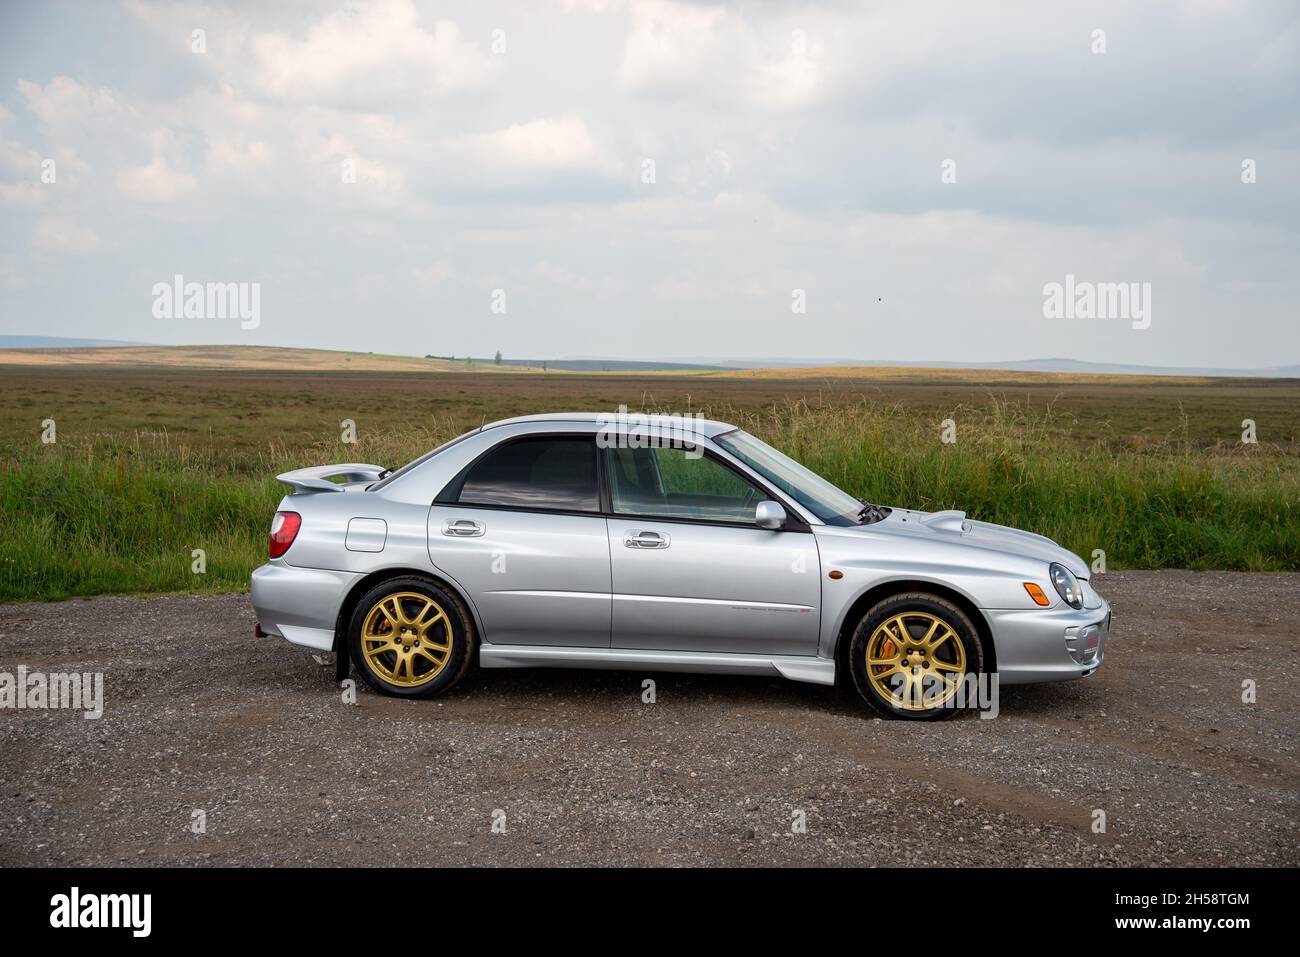 Silver Subaru Wrx Xti With Gold Wheels Parked On Gravel Beside Moorland In The Peak